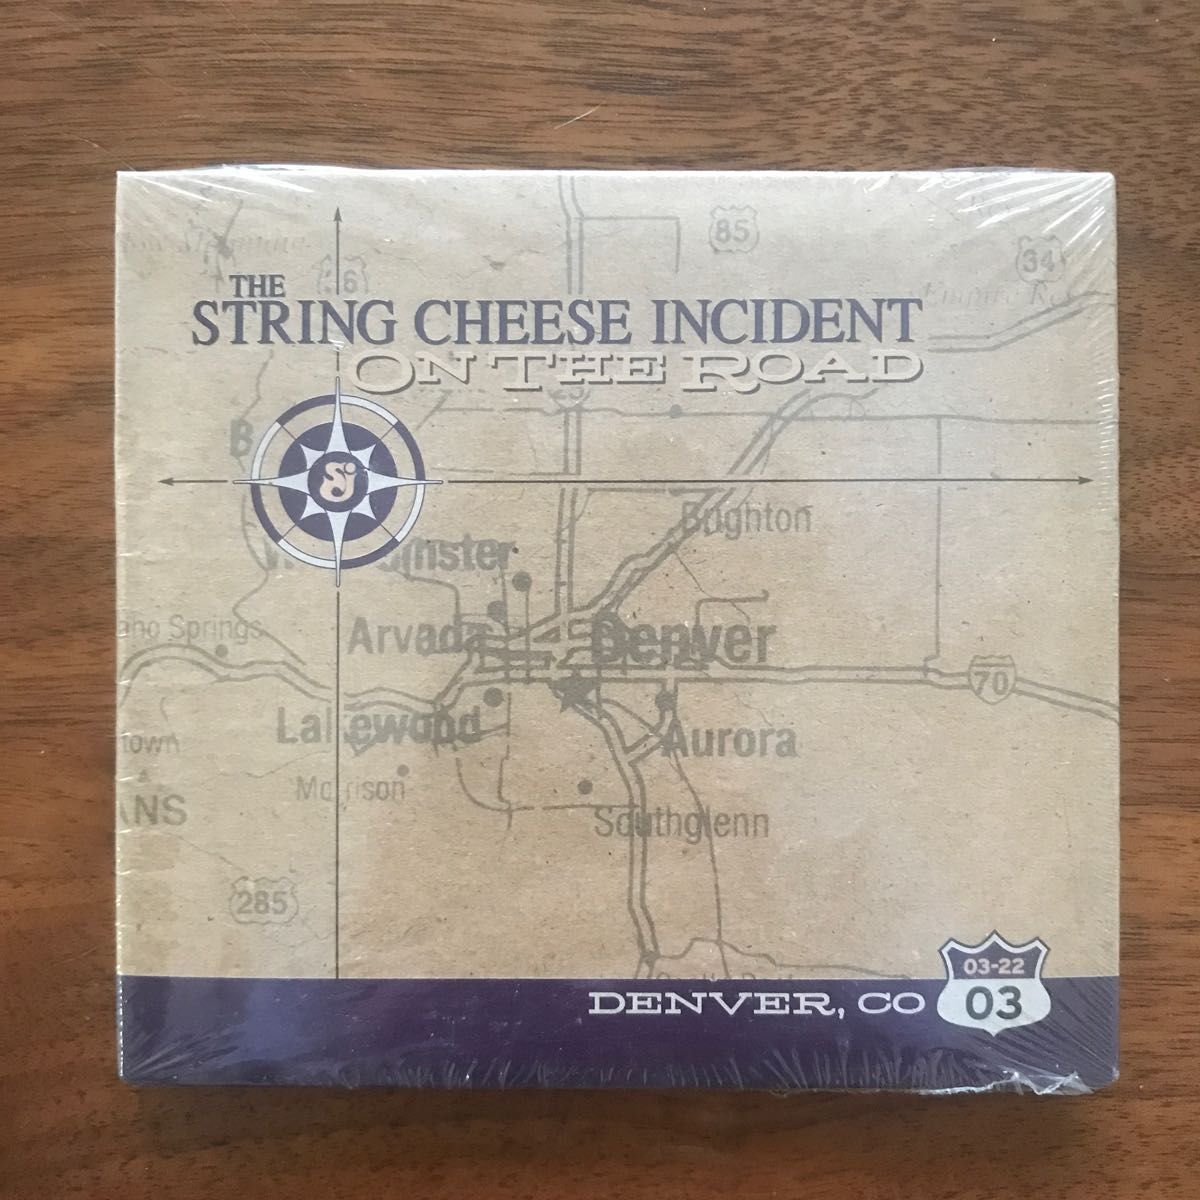 [CD] the string cheese incident on the road ライブ3CD ２点セット 未開封